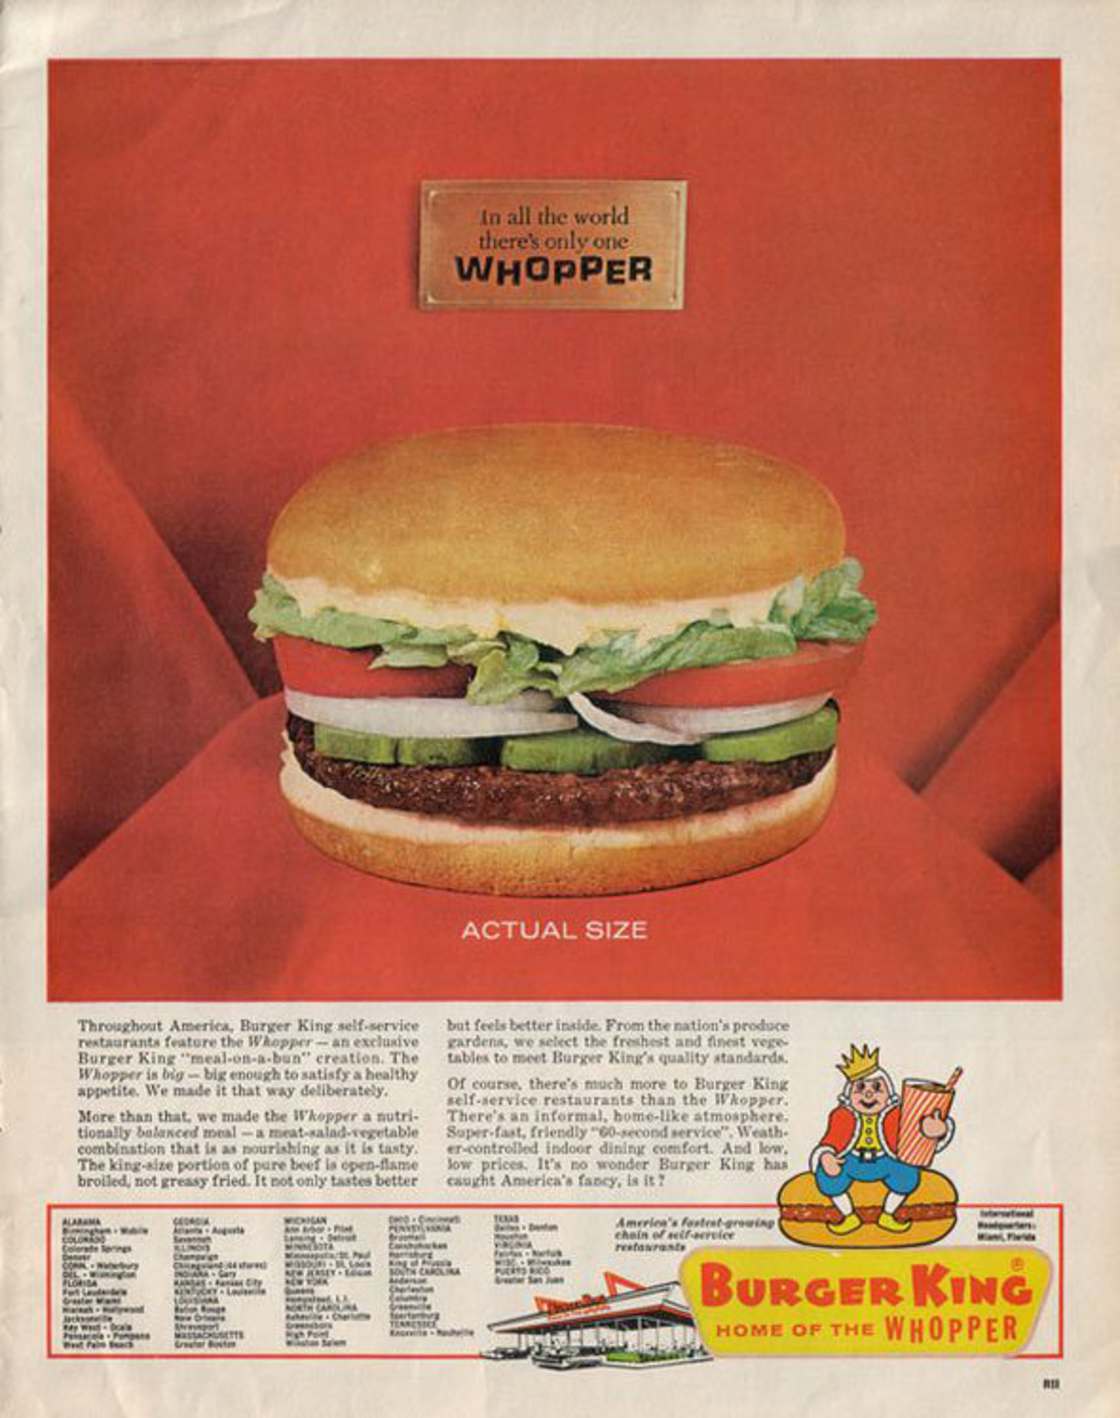 random vintage fast food ads - In all the world there's only one Whopper Actual Size Throughout America, Burger King selfservice restaurants feature the Whopper an exclusive Burger King mealonabun" creation. The Whopper is big big enough to satisfy a heal